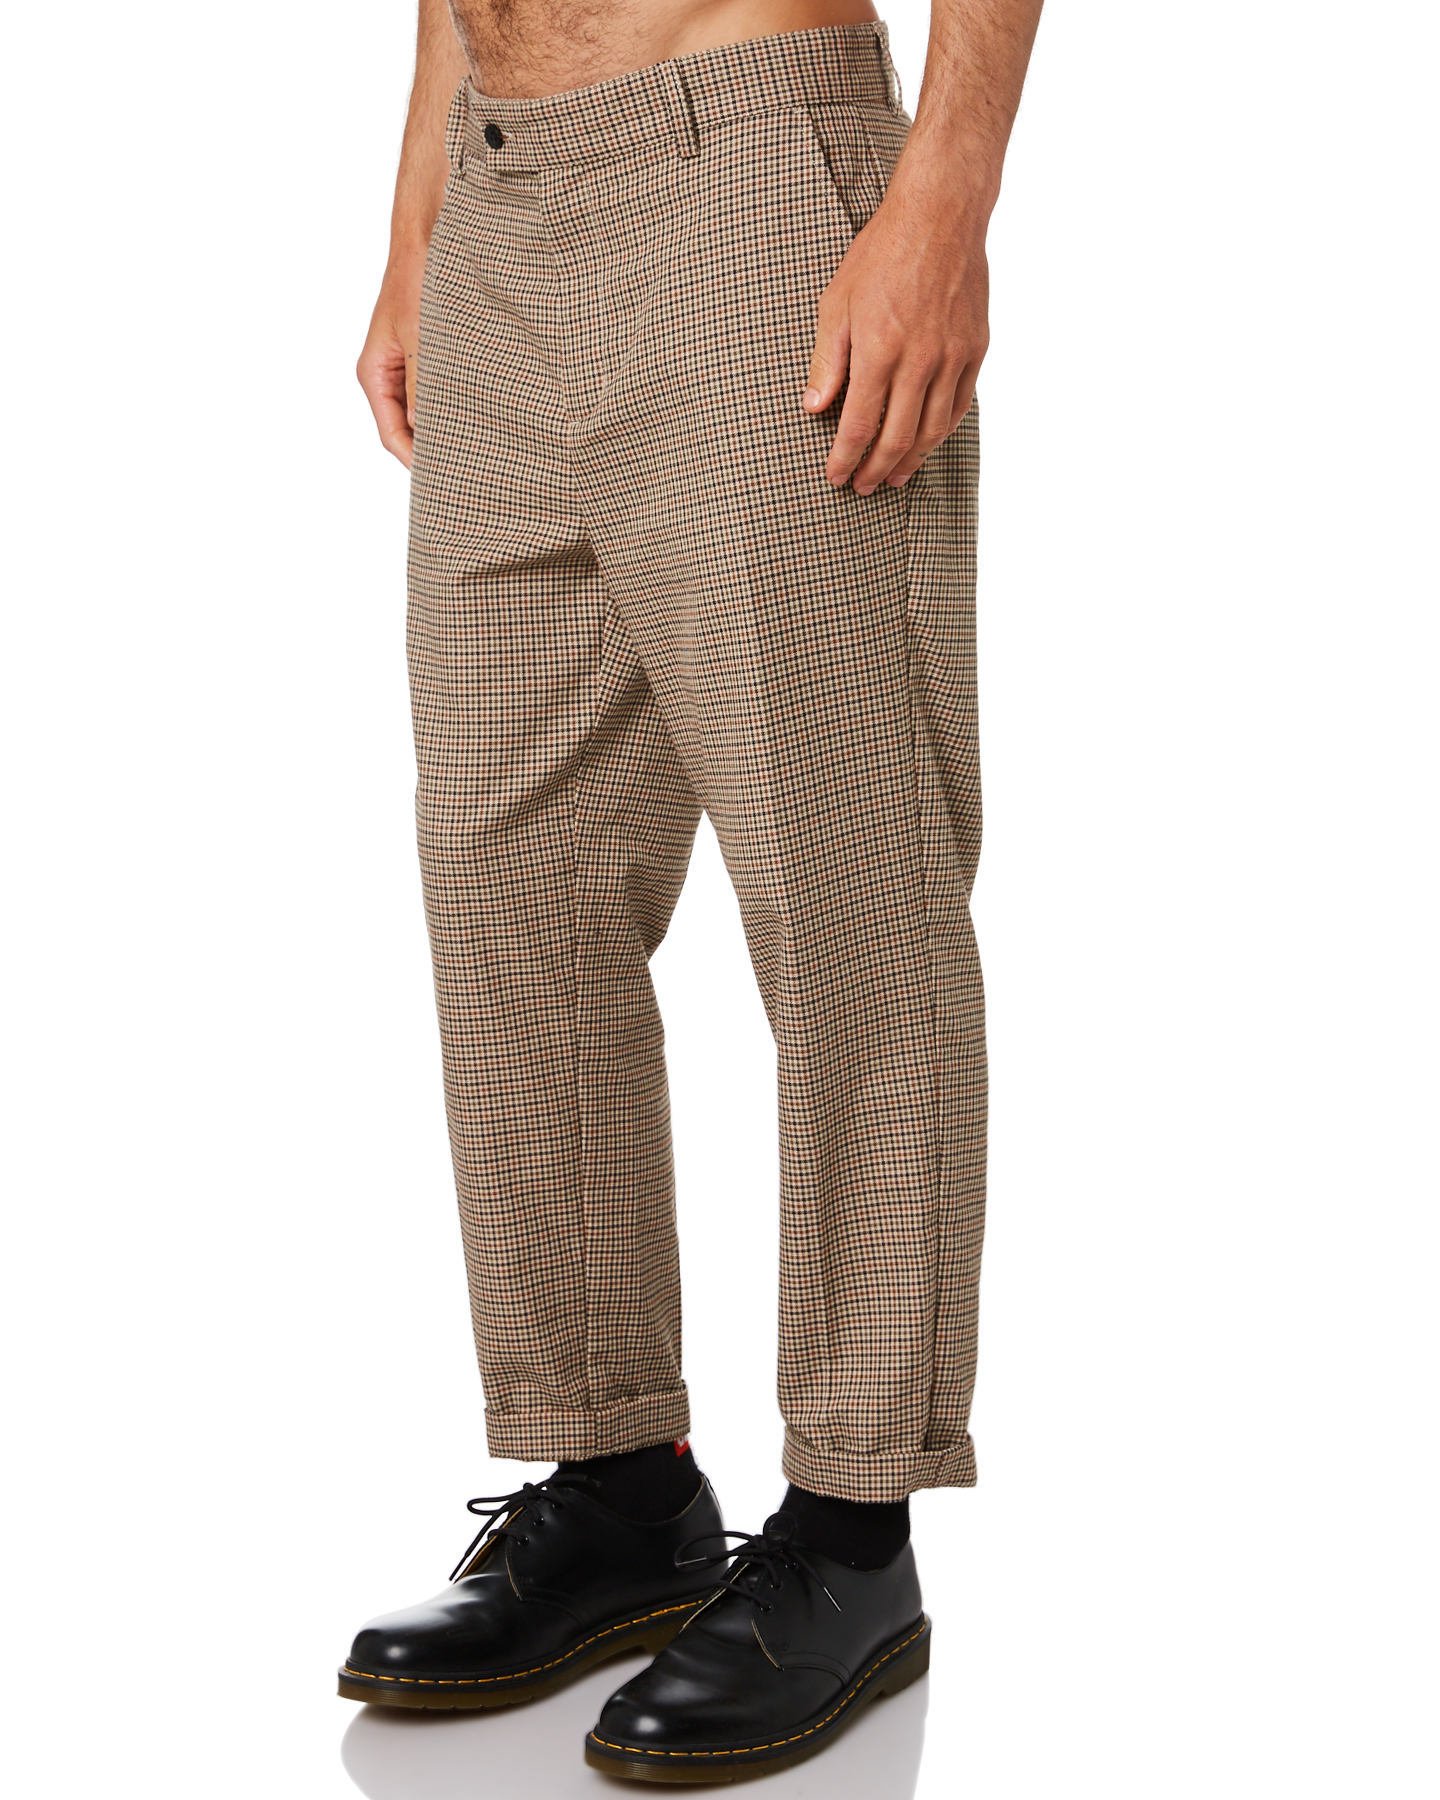 Insight Airhead Weekend Mens Pant - Brown | SurfStitch